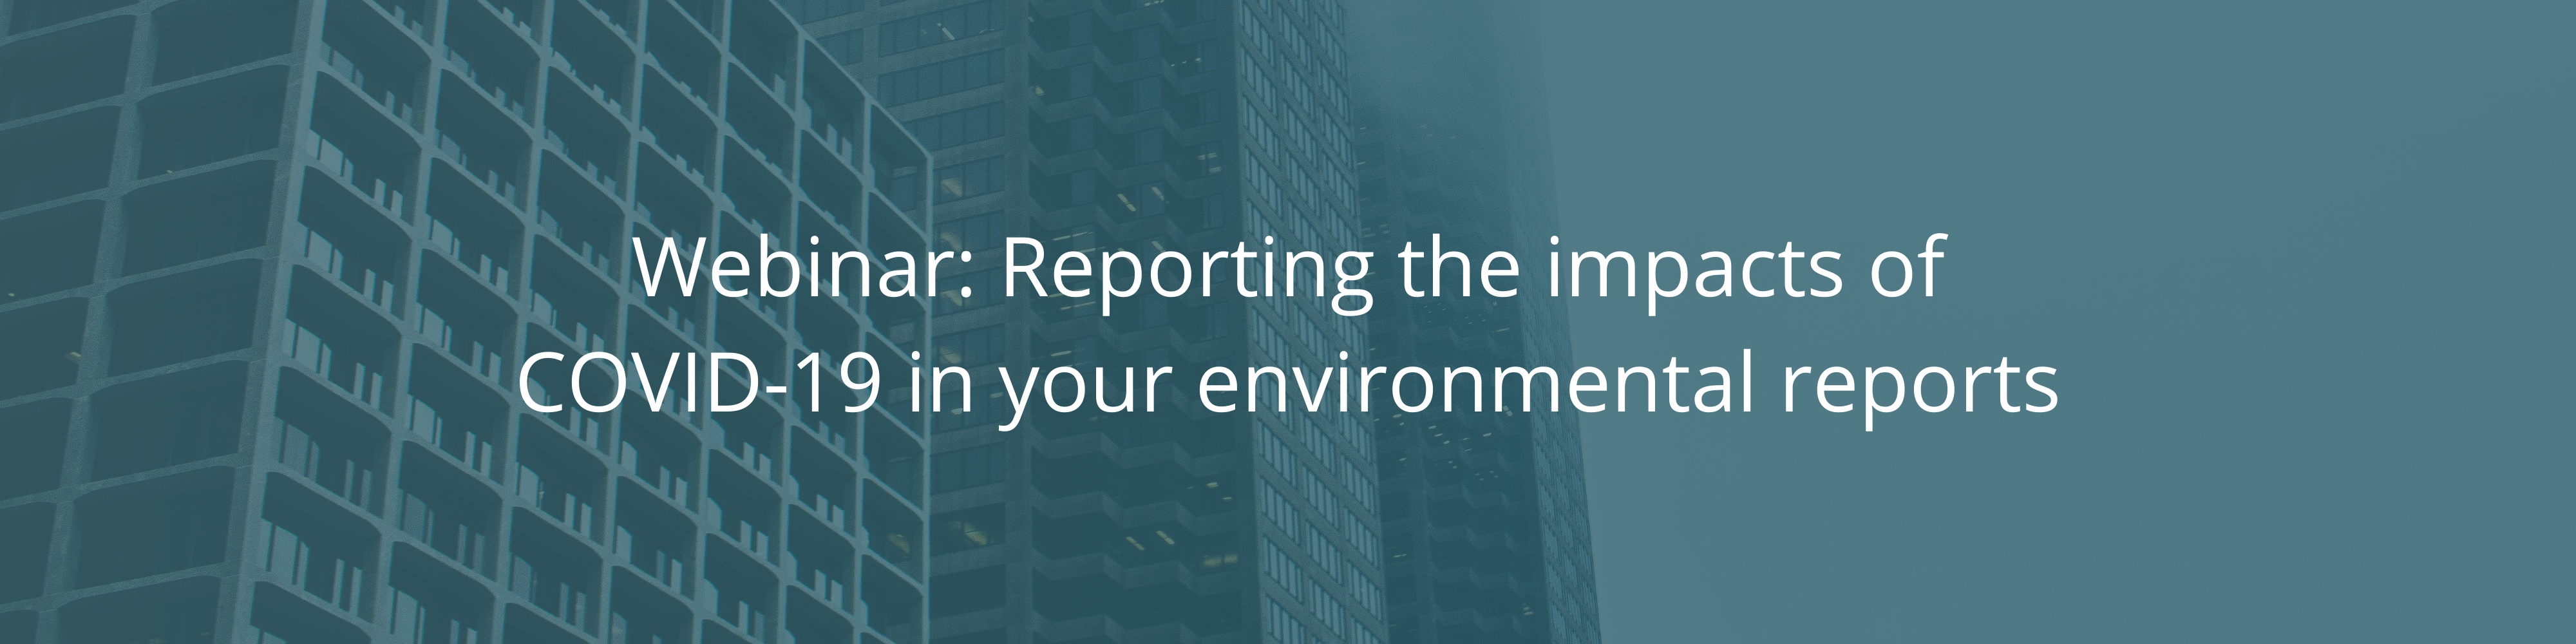 Reporting the impacts of COVID-19 in your environmental reports